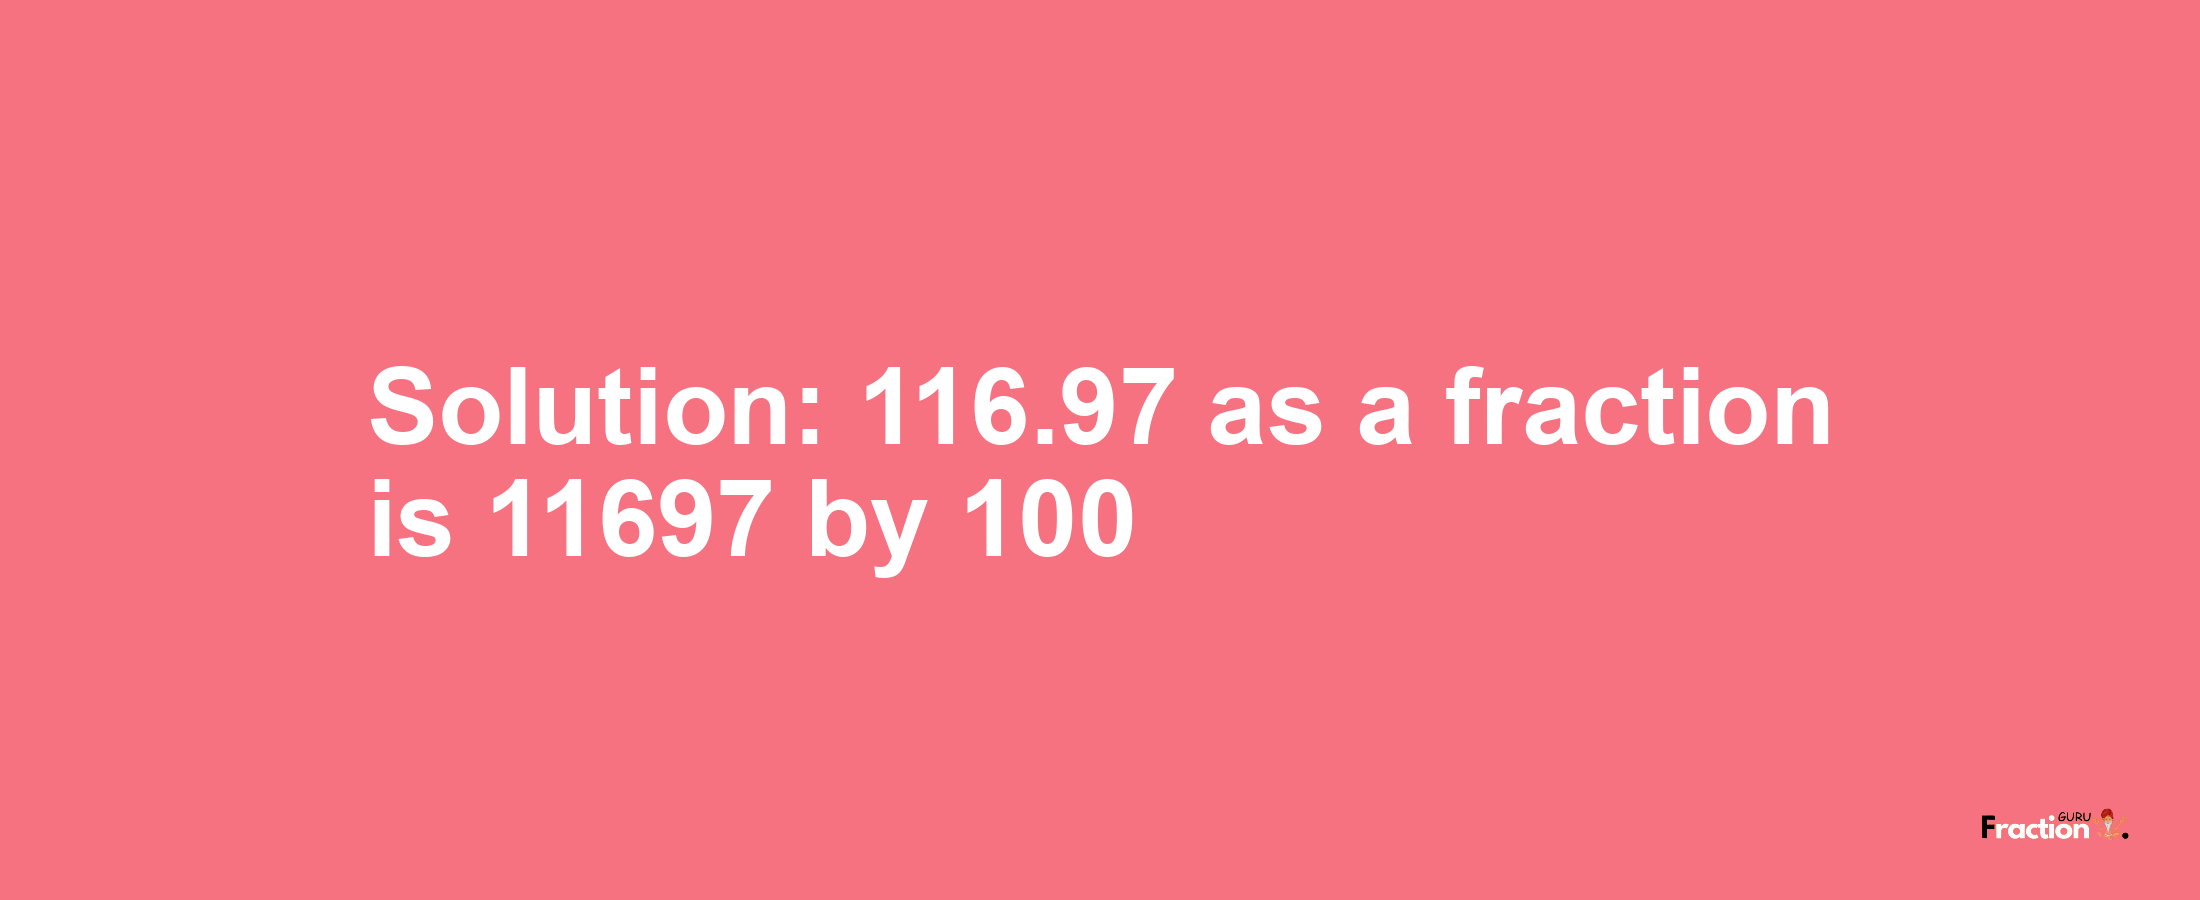 Solution:116.97 as a fraction is 11697/100